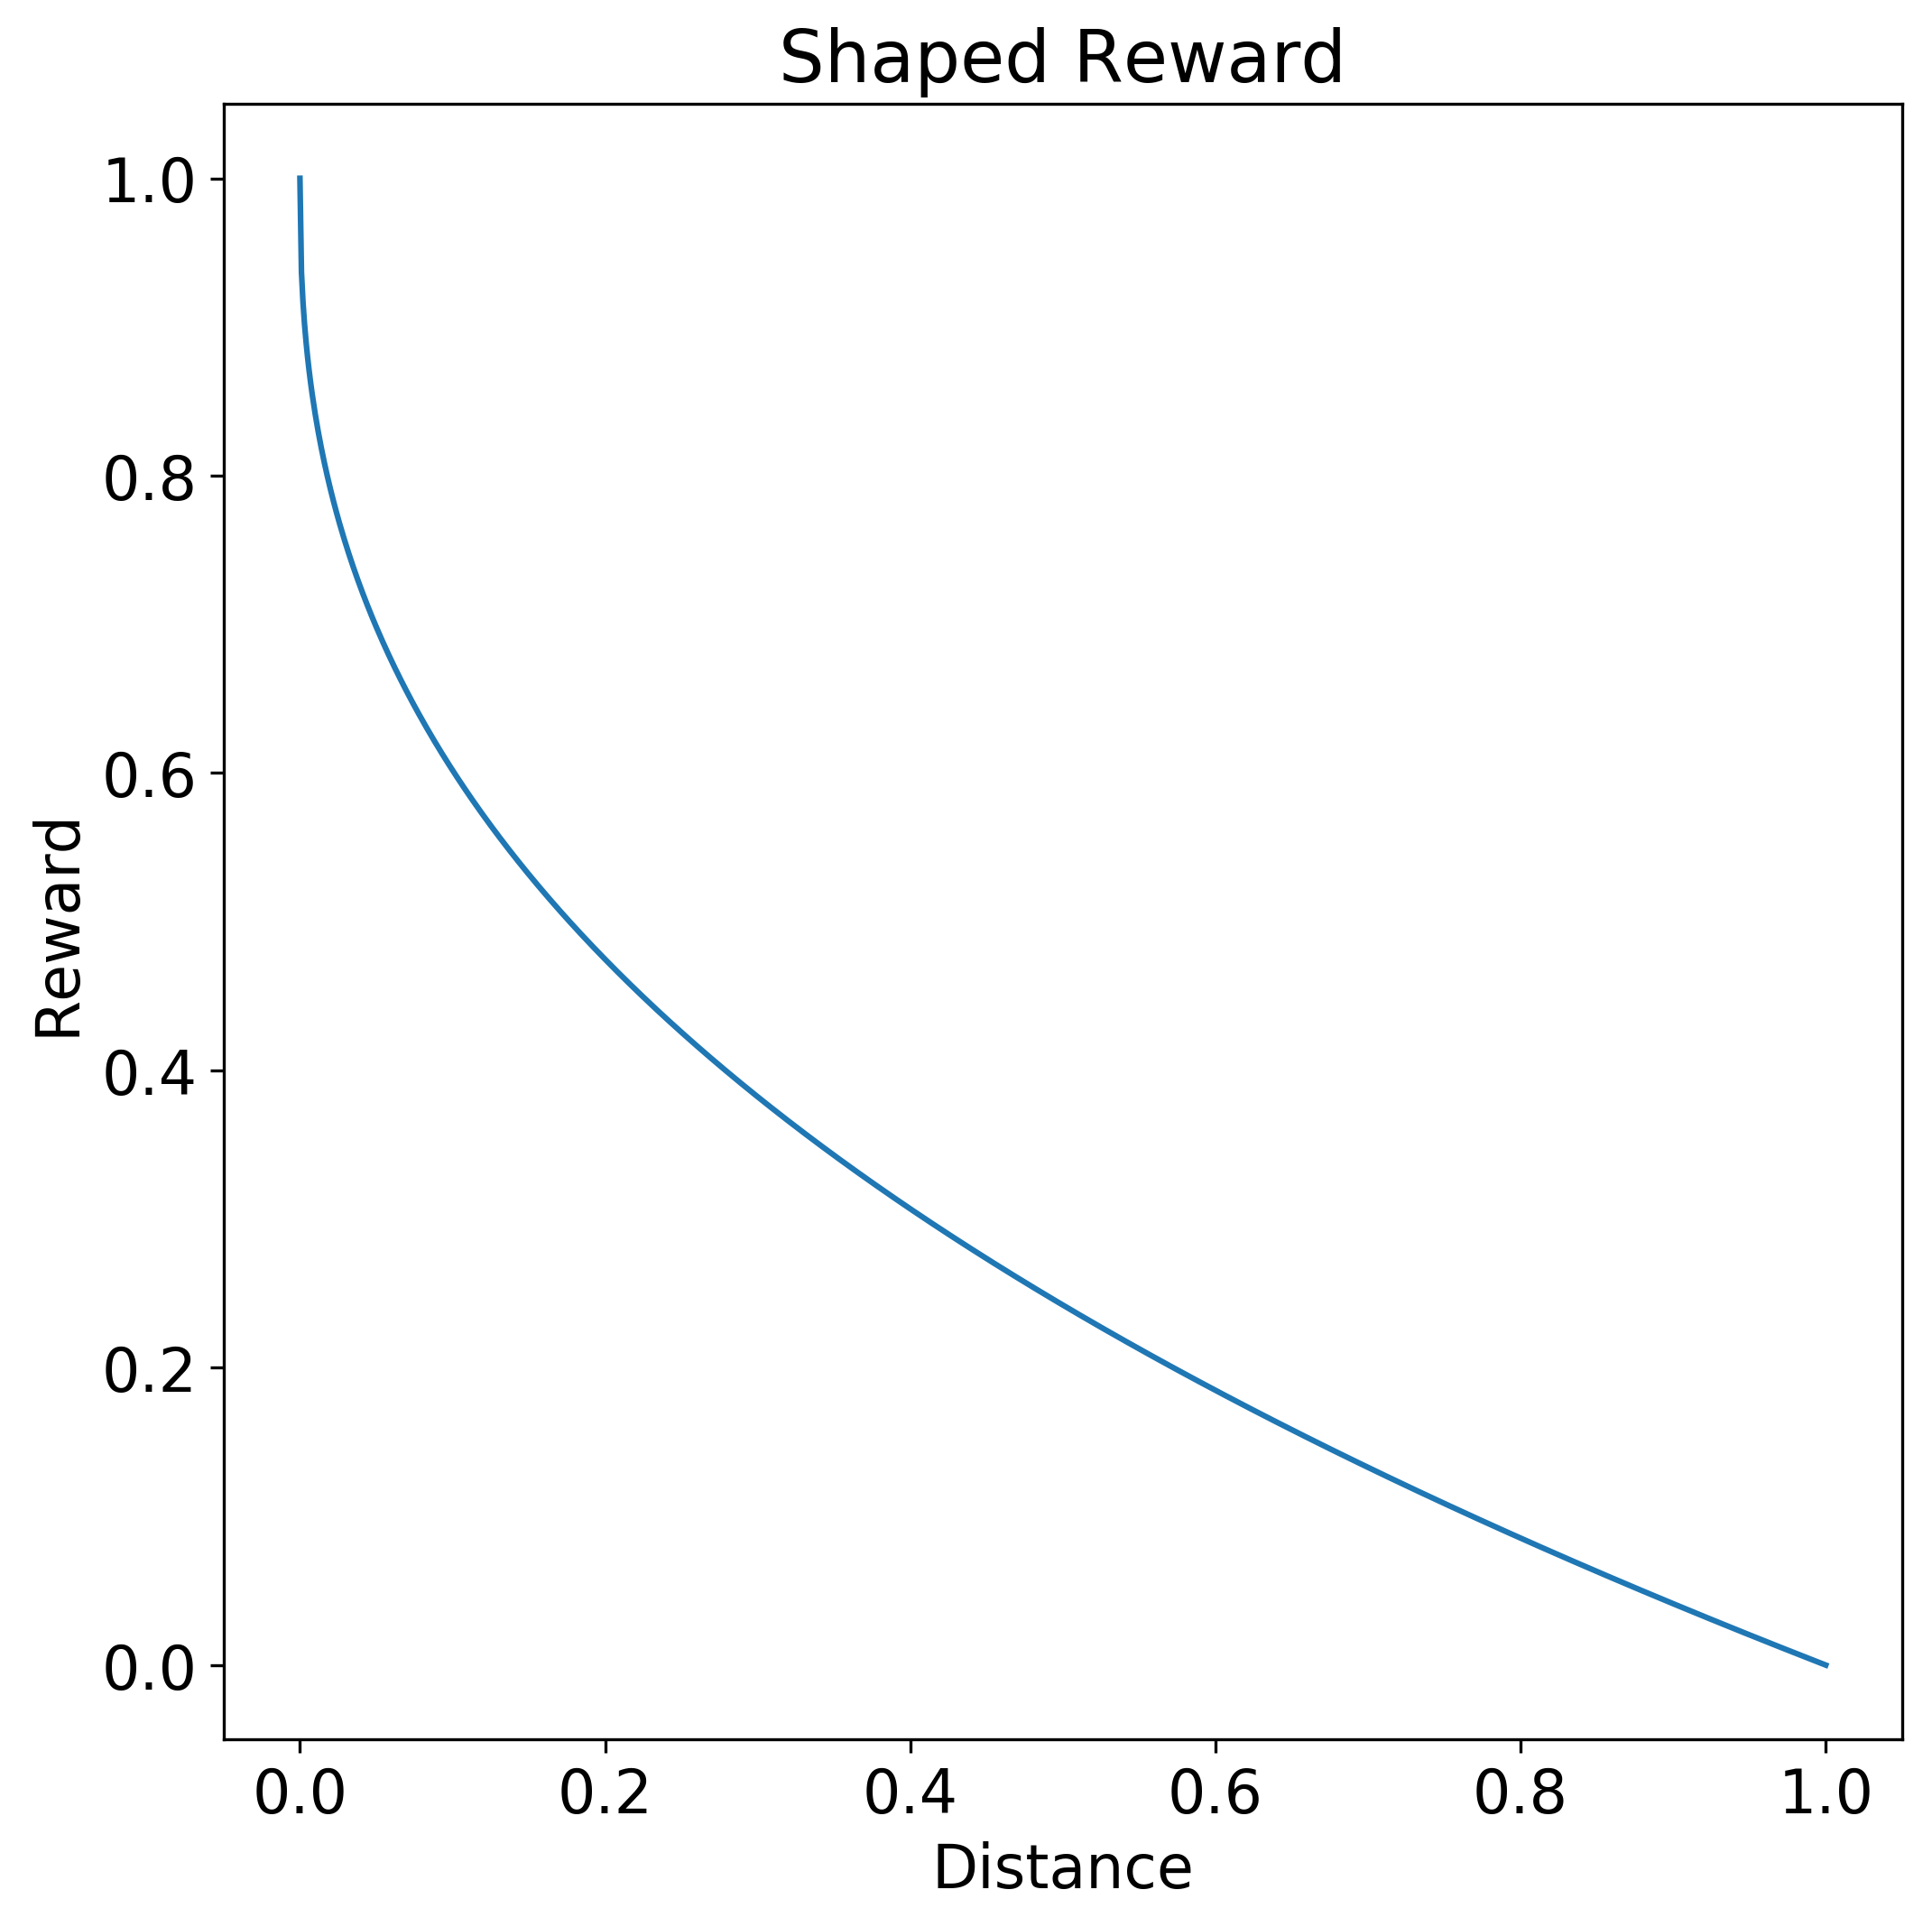 Reinforcement learning: chart showing a shaped reward function.